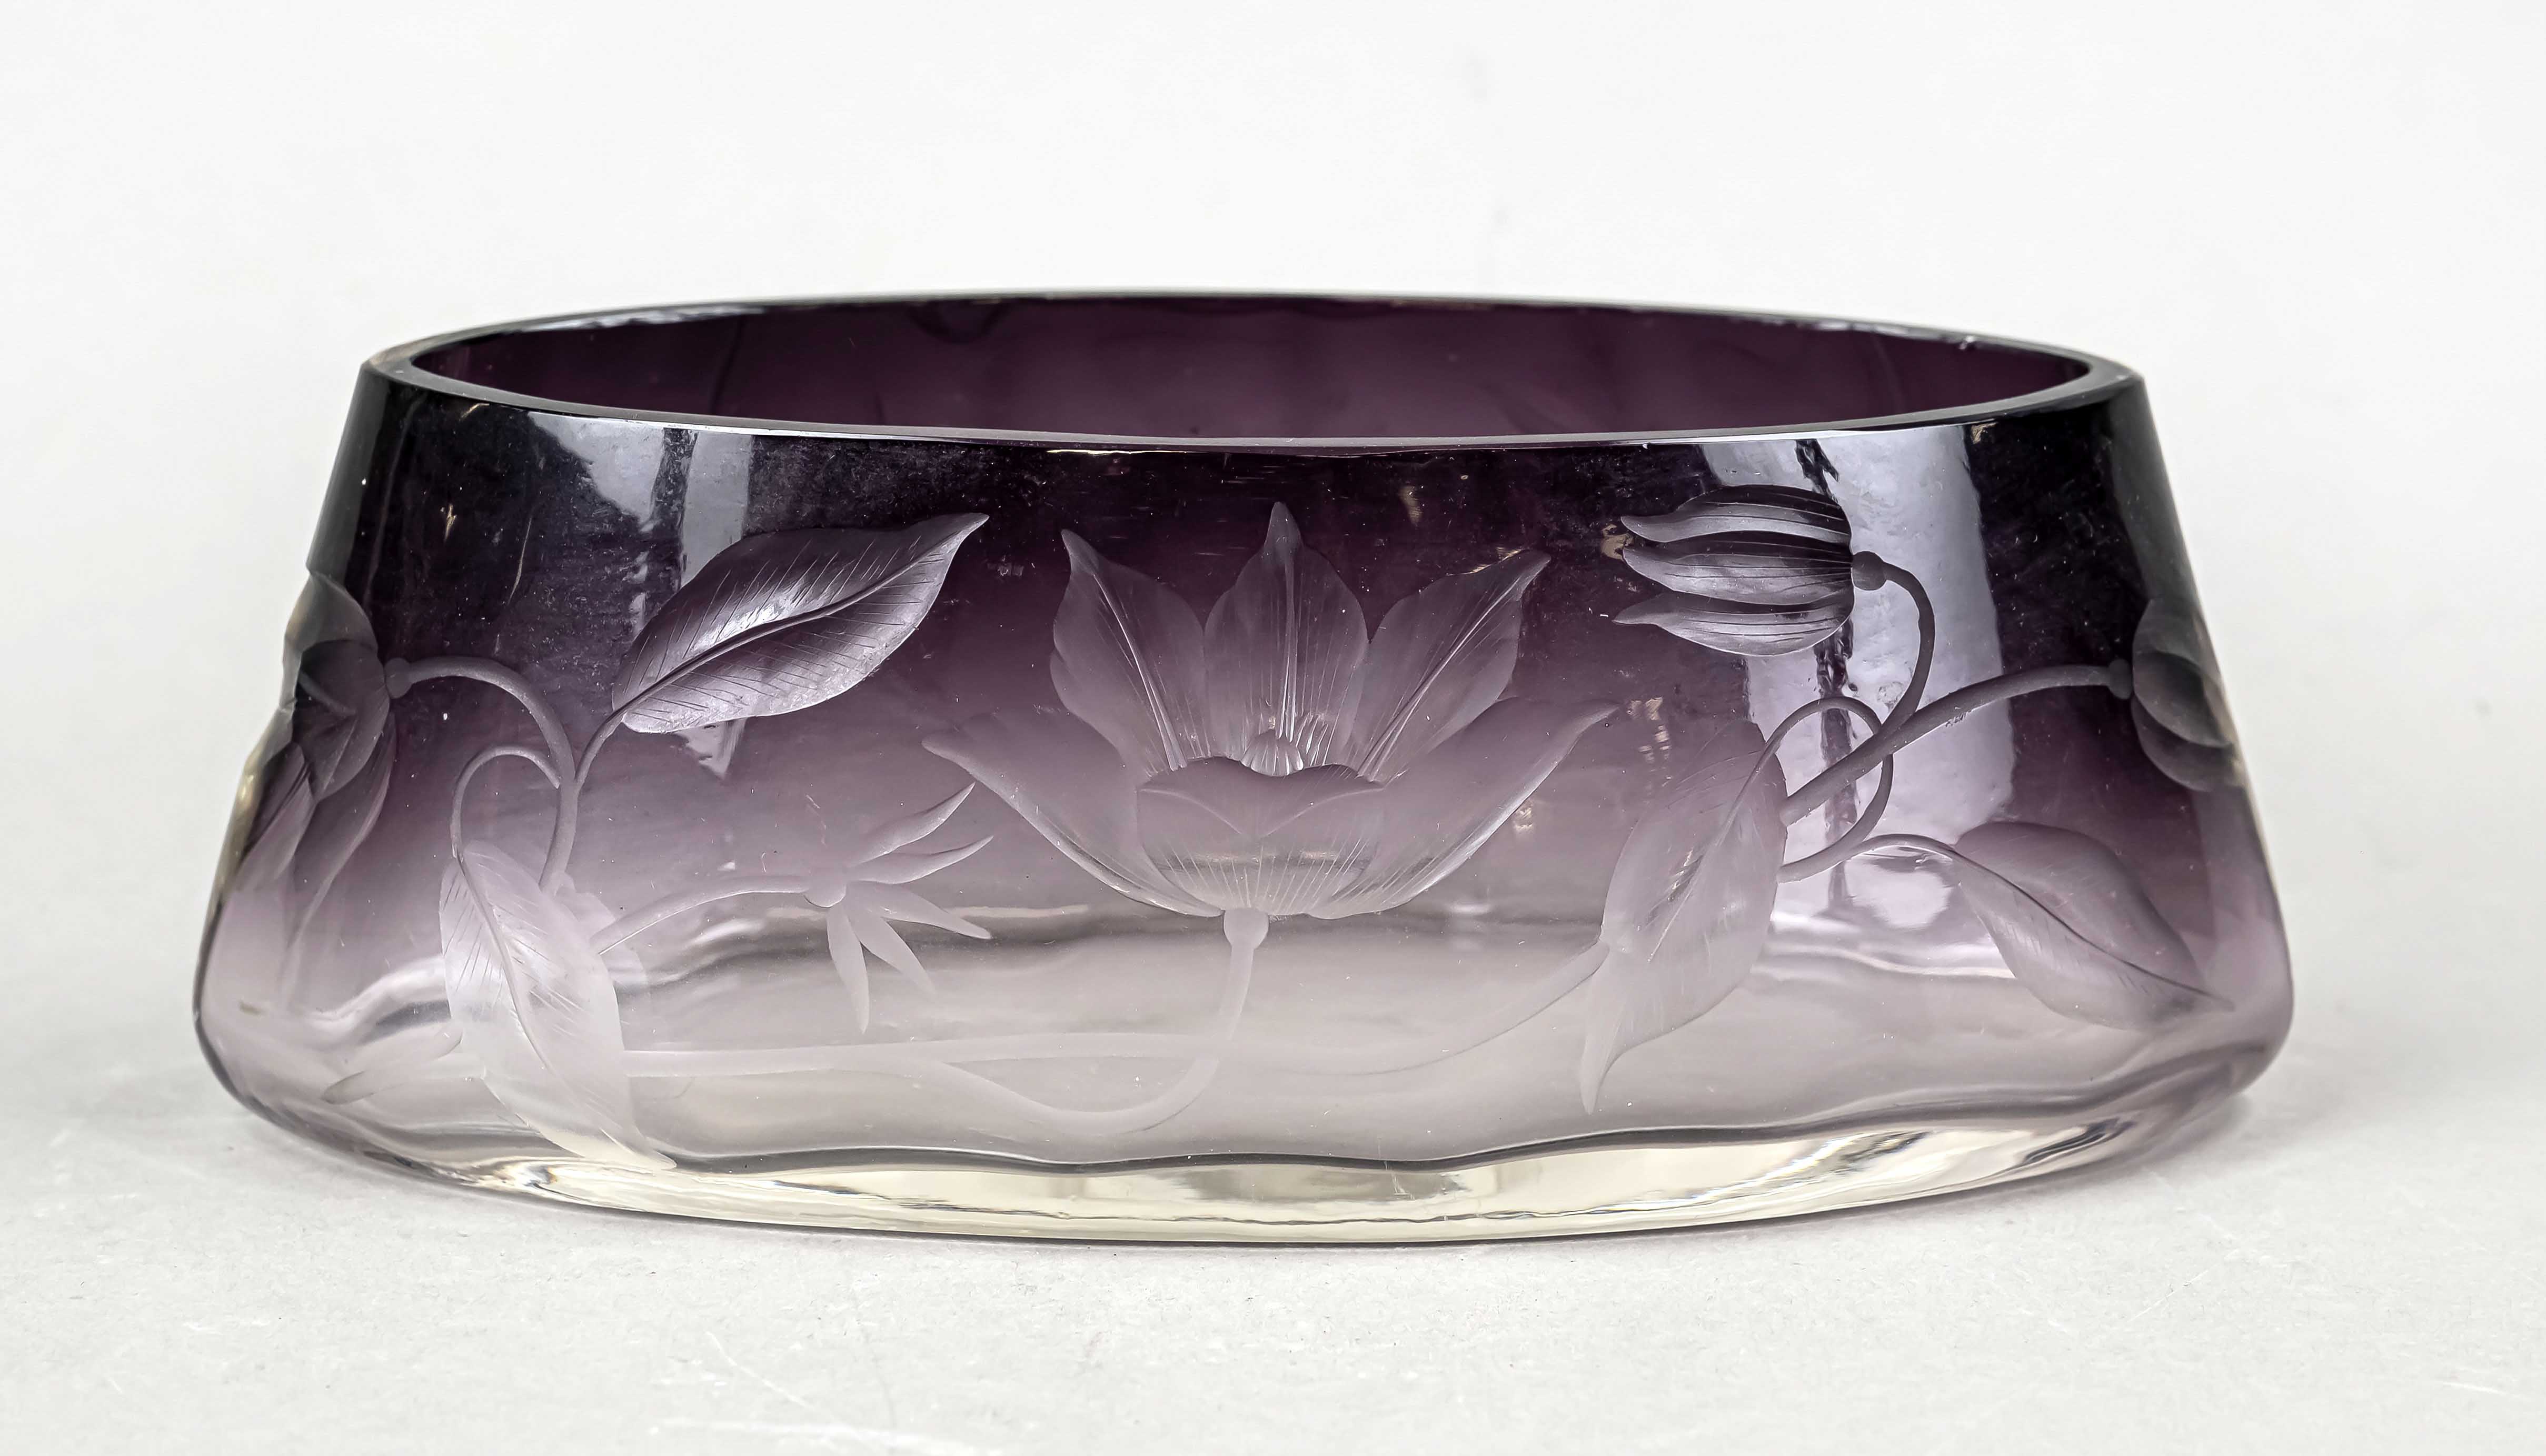 Oval bowl, Bohemia, Ludwig Moser & Sons, Karlovy Vary, mark 1870-1918, boat shape, clear and